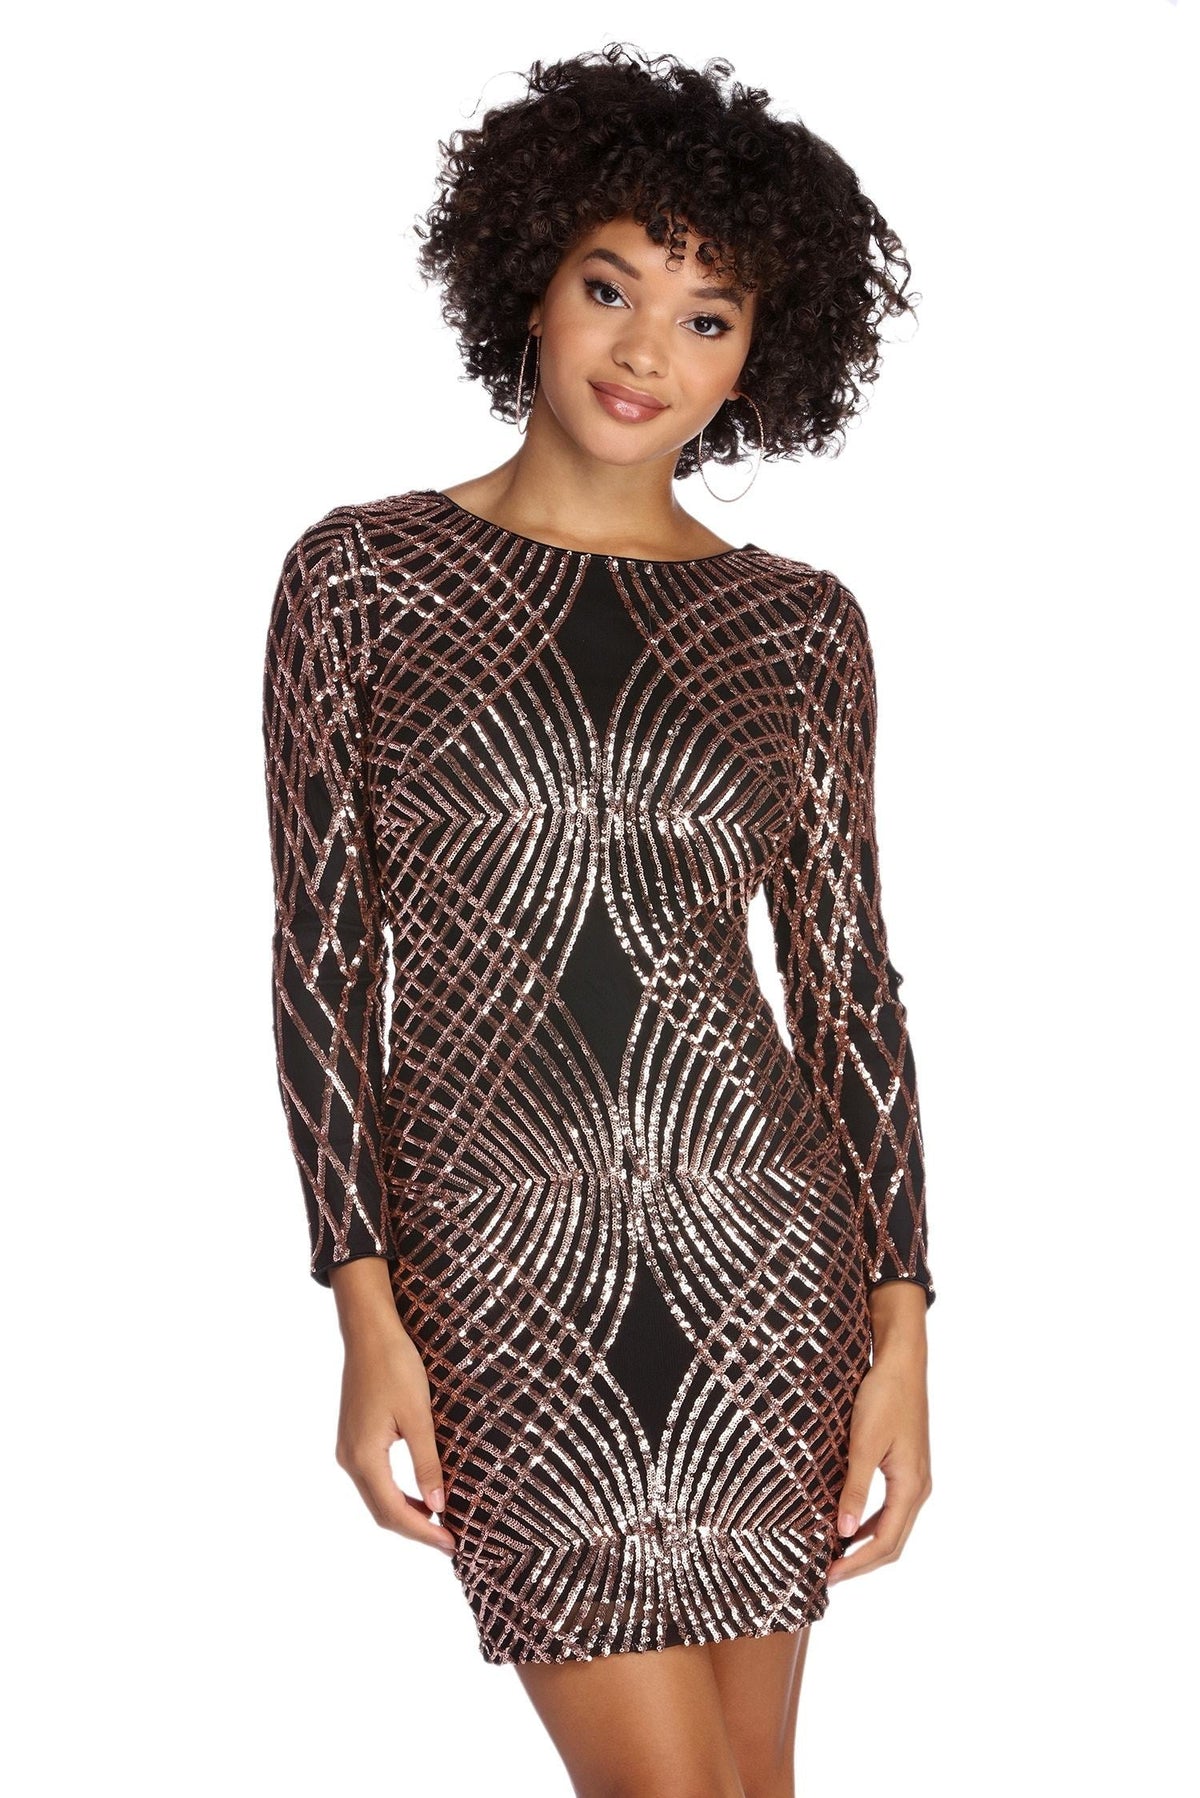 Elysse Steal The Show Sequin Dress - Lady Occasions